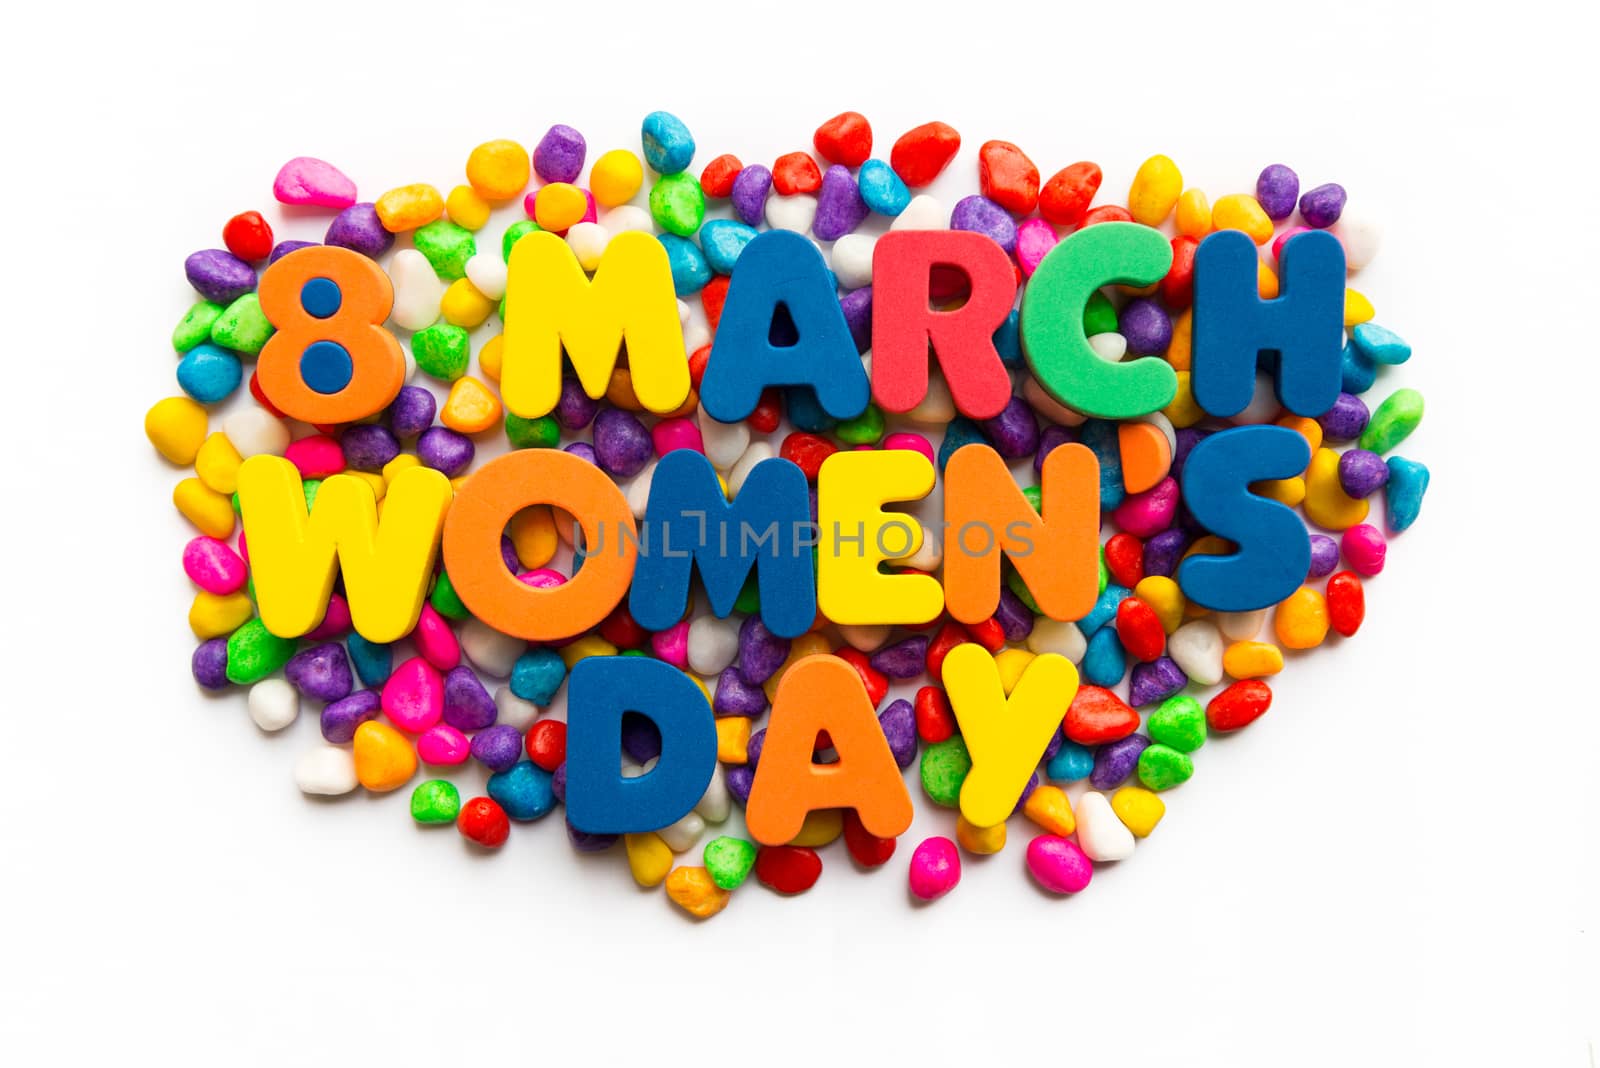 8 march women's day word in colorful stone by sohel.parvez@hotmail.com